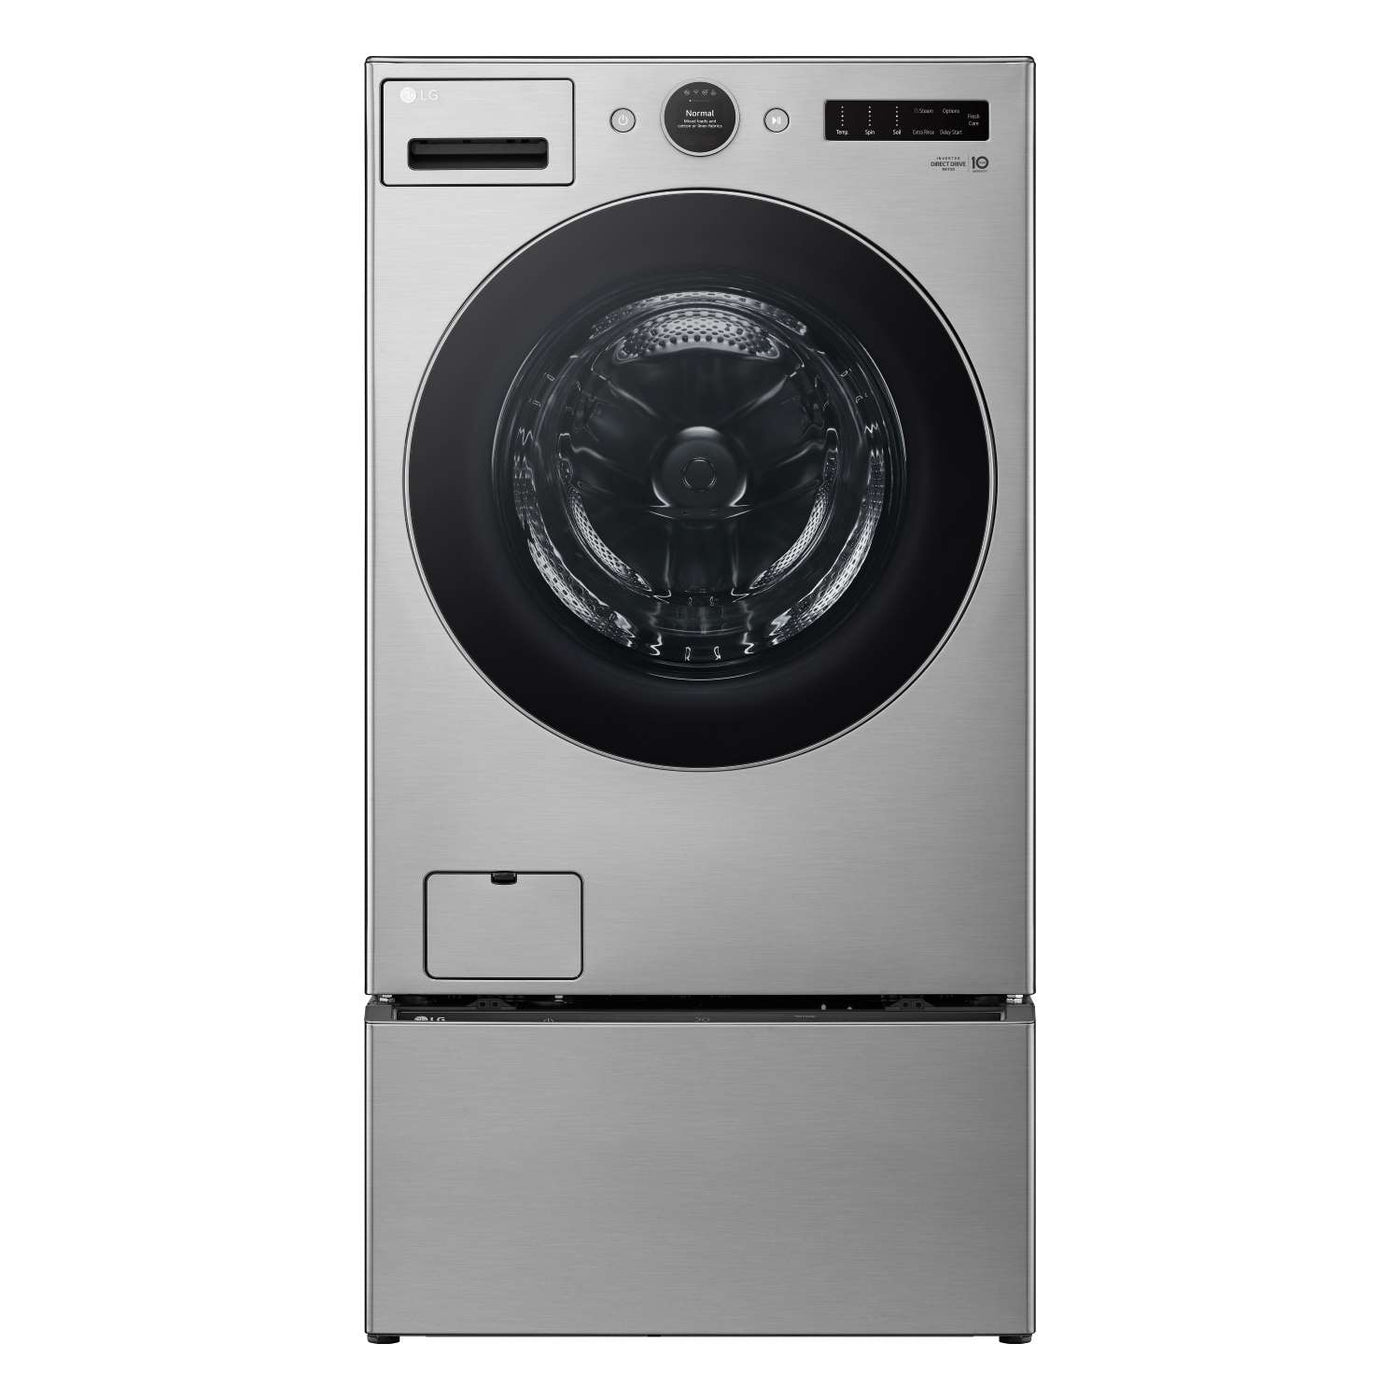 LG Graphite Steel 5.2 cu. ft. Front Load Washer with AI DD™ and LCD Knob - WM5500HVA